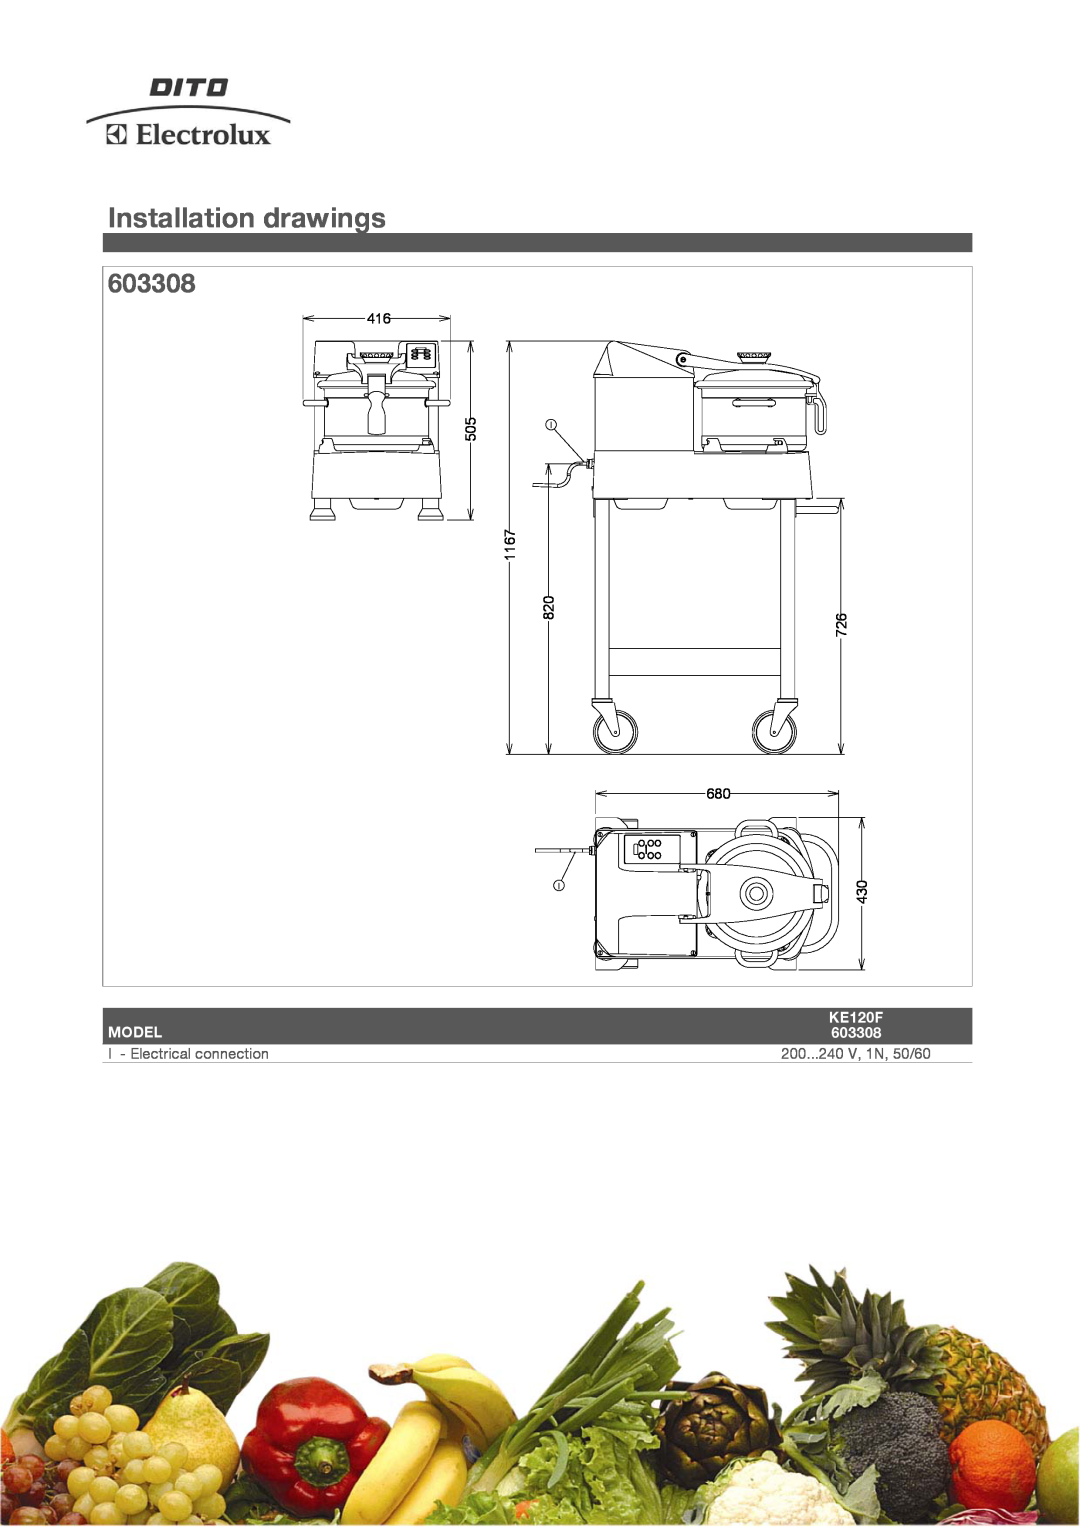 Electrolux 603308 manual Installation drawings, 1167 820, 680 430, Model, KE120F, I - Electrical connection 